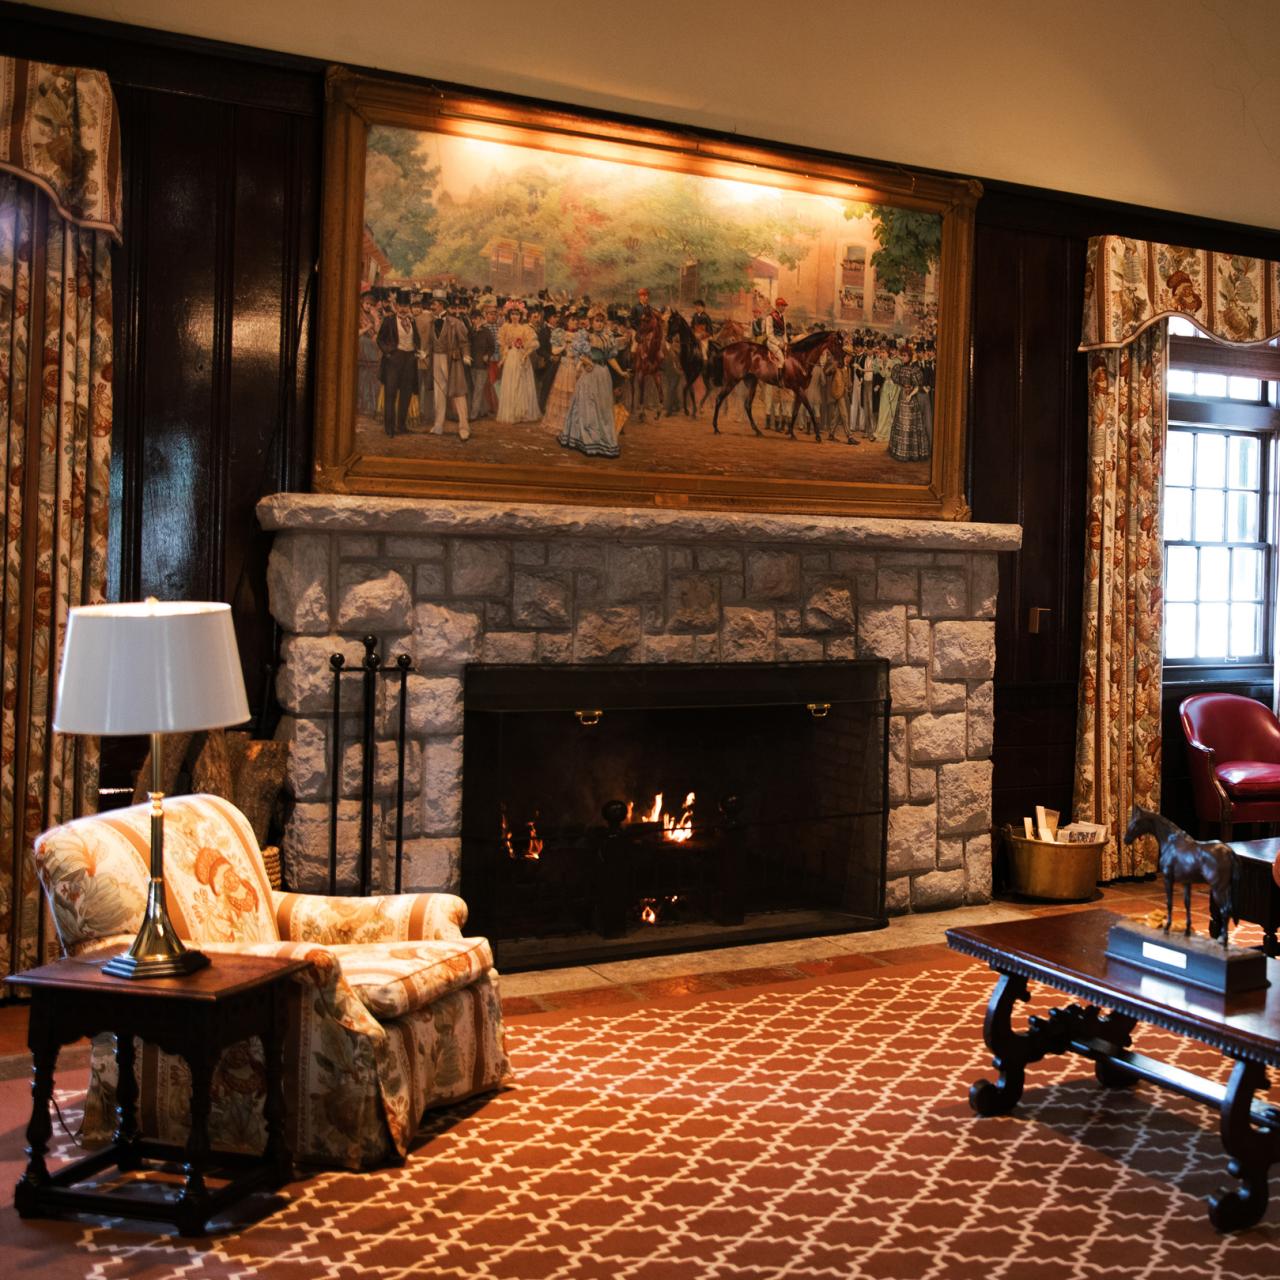 Keeneland clubhouse at a cozy day. Looking at the painting and fireplace on. 